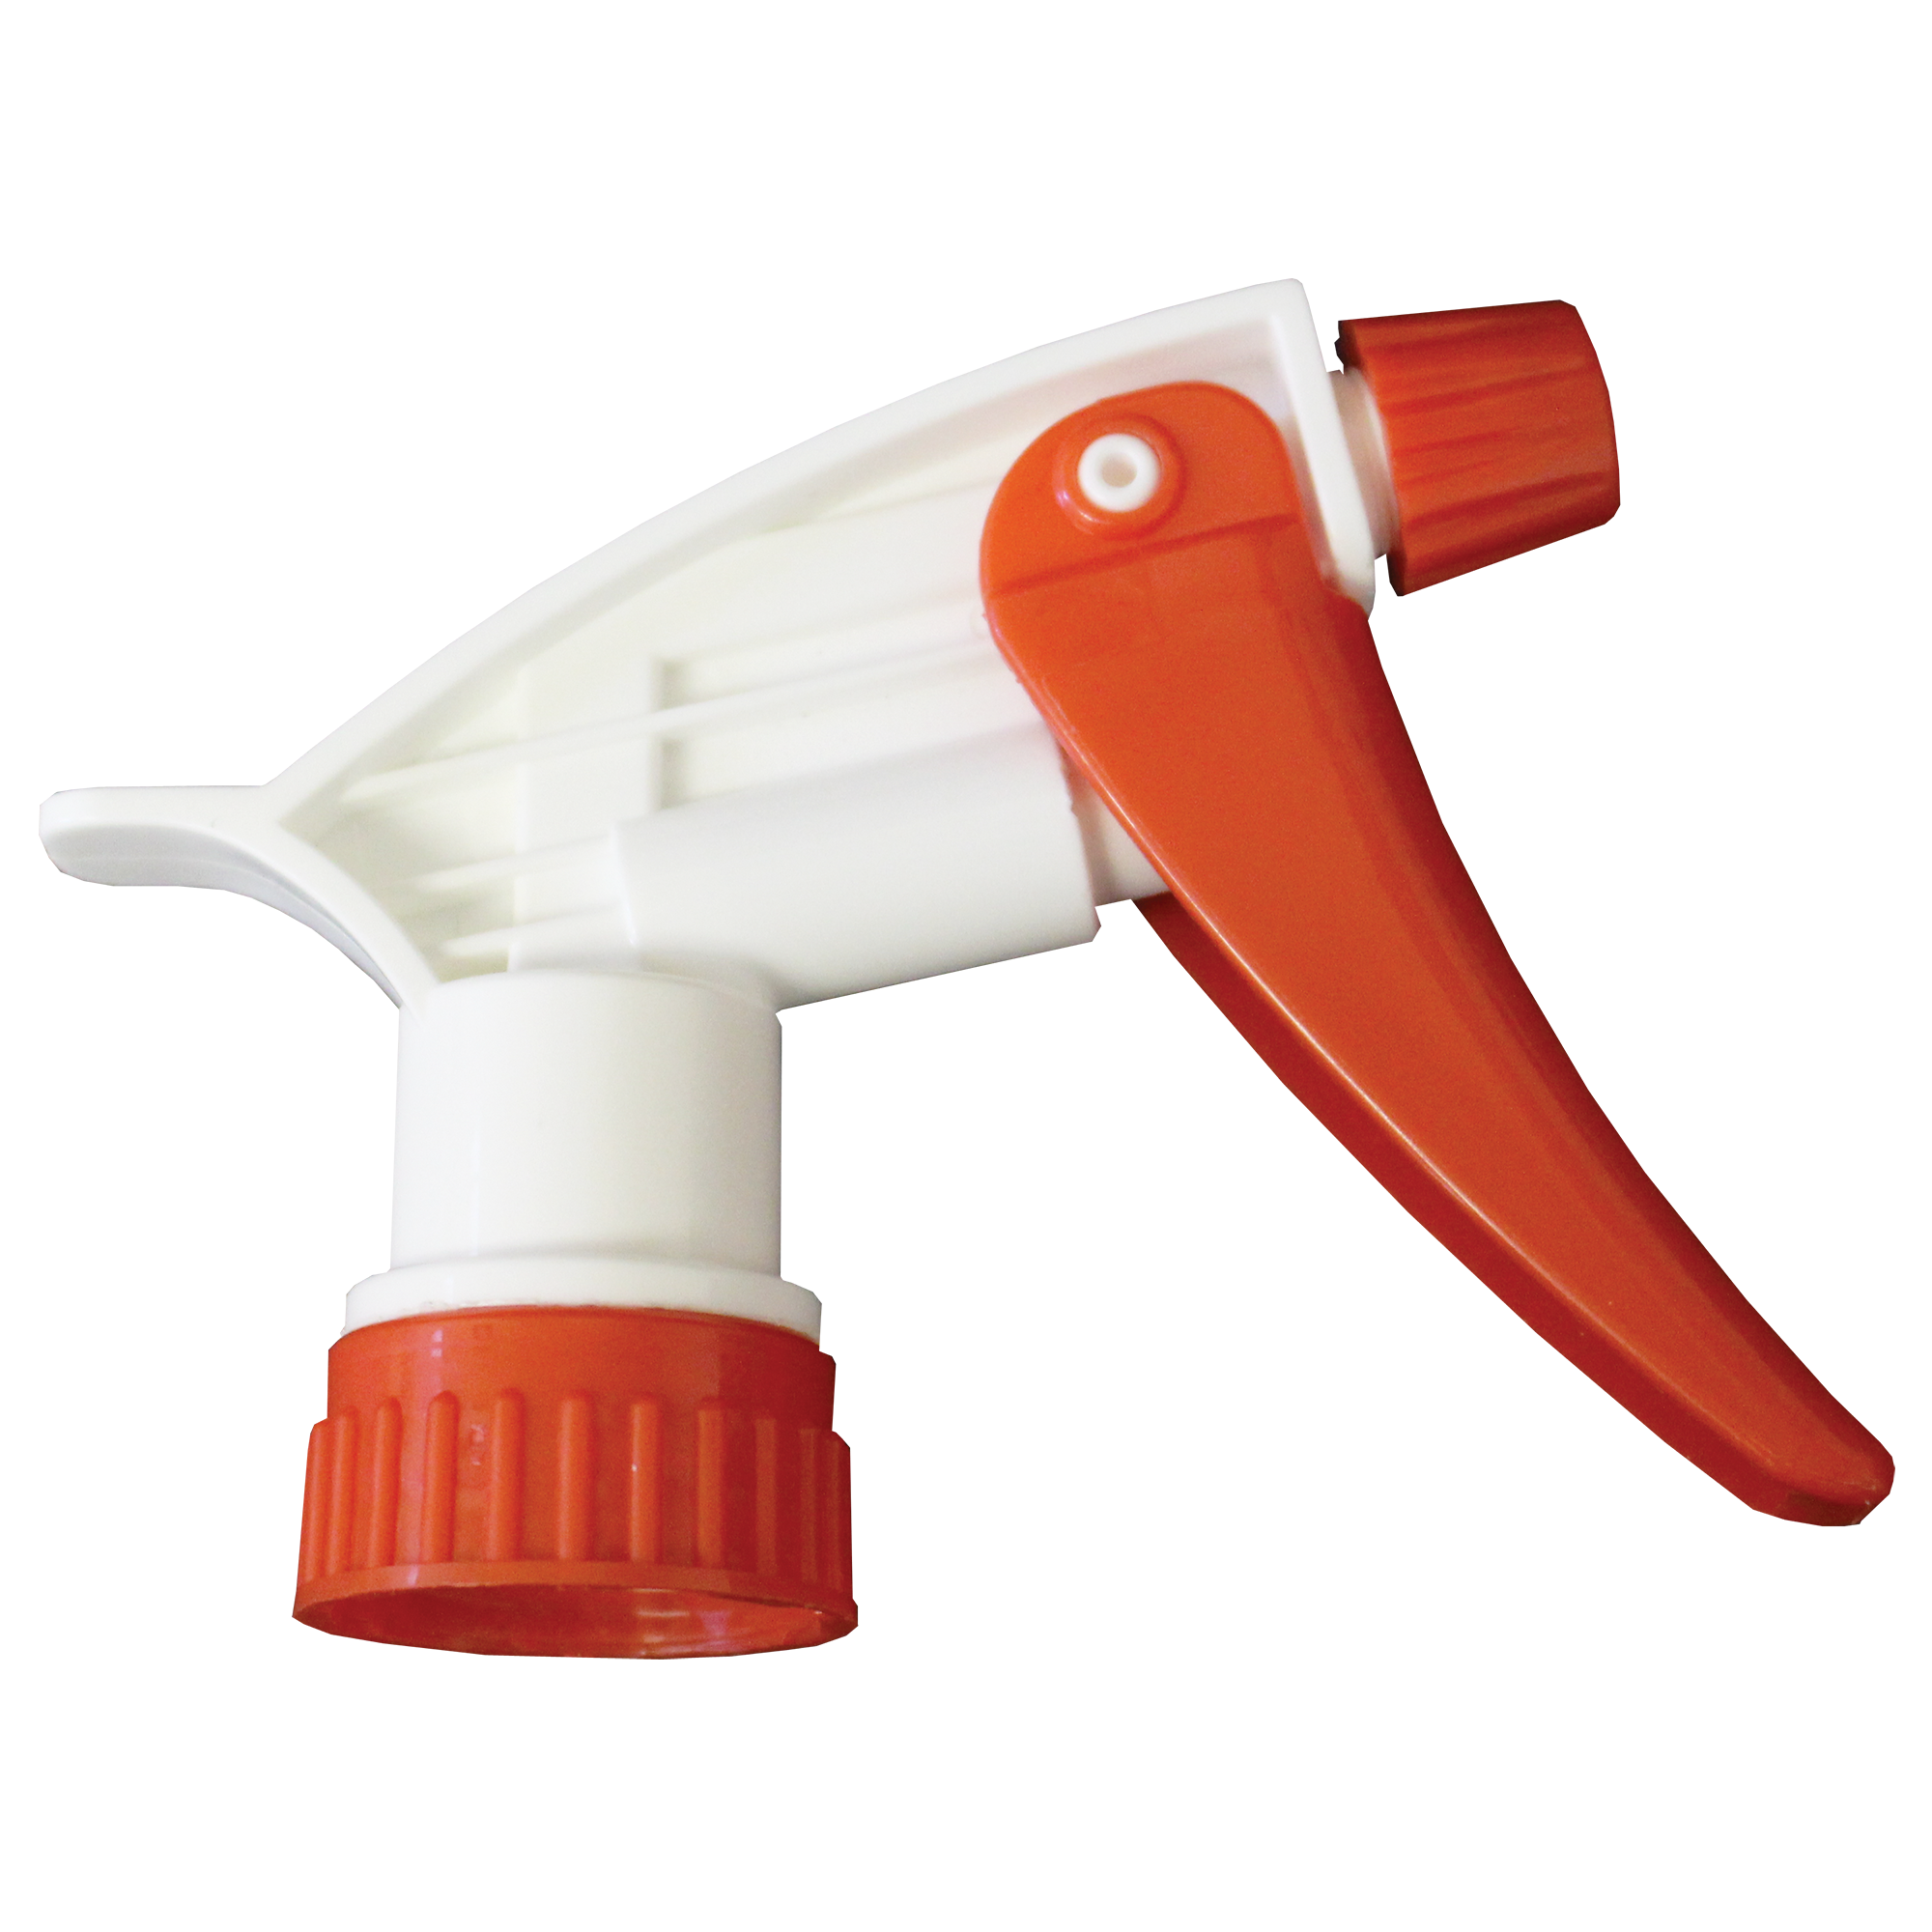 Model 320 red trigger srayer 7.5" & 1.4 ml / output